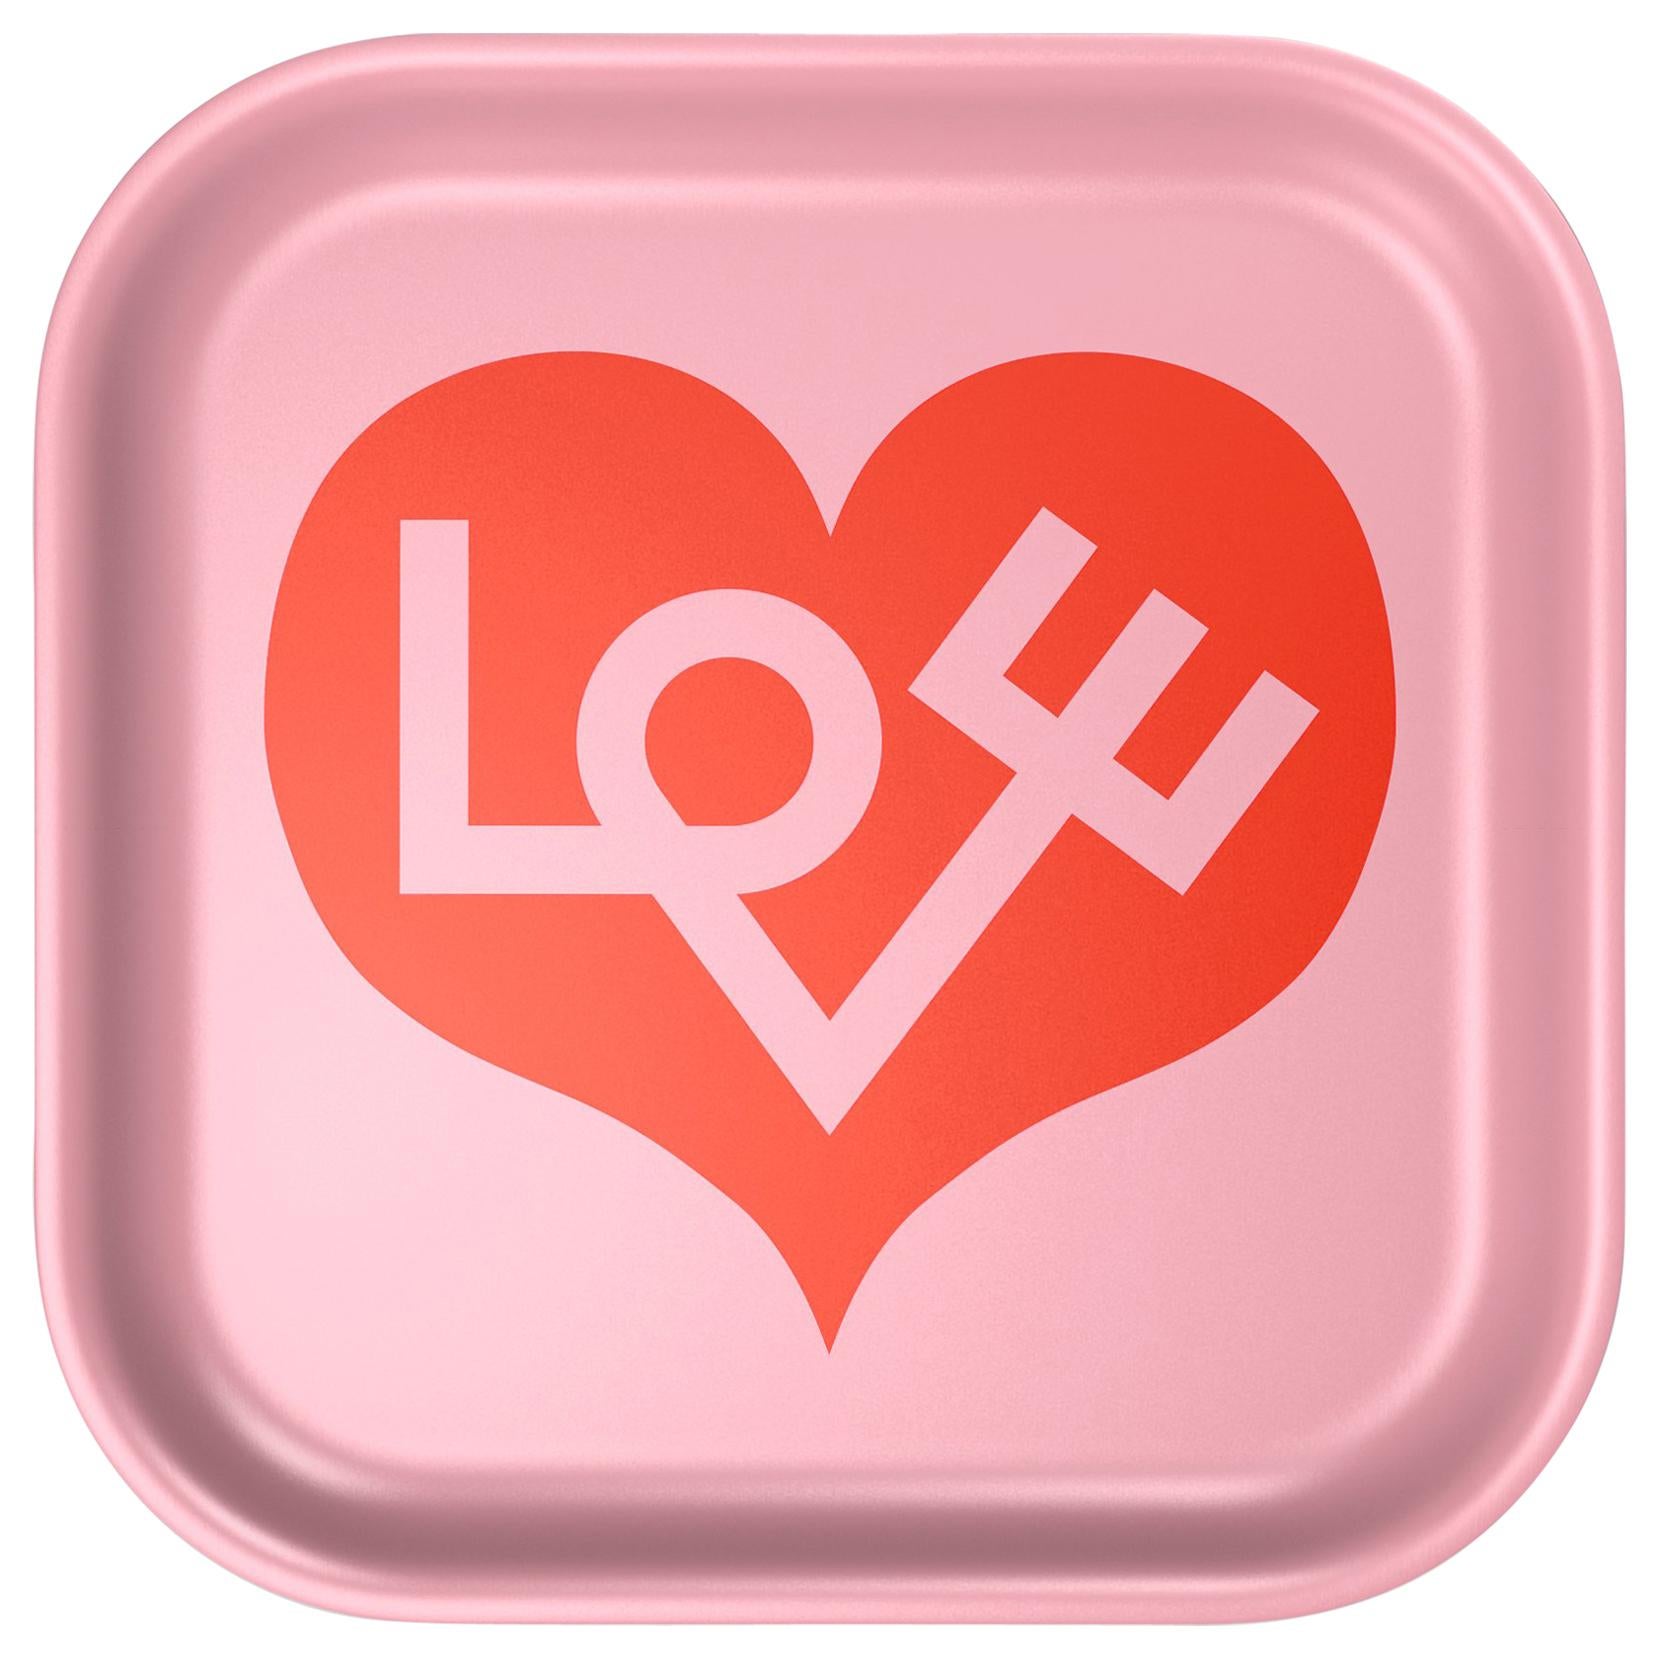 Vitra Small Classic Tray in Love Heart Design by Alexander Girard im Angebot